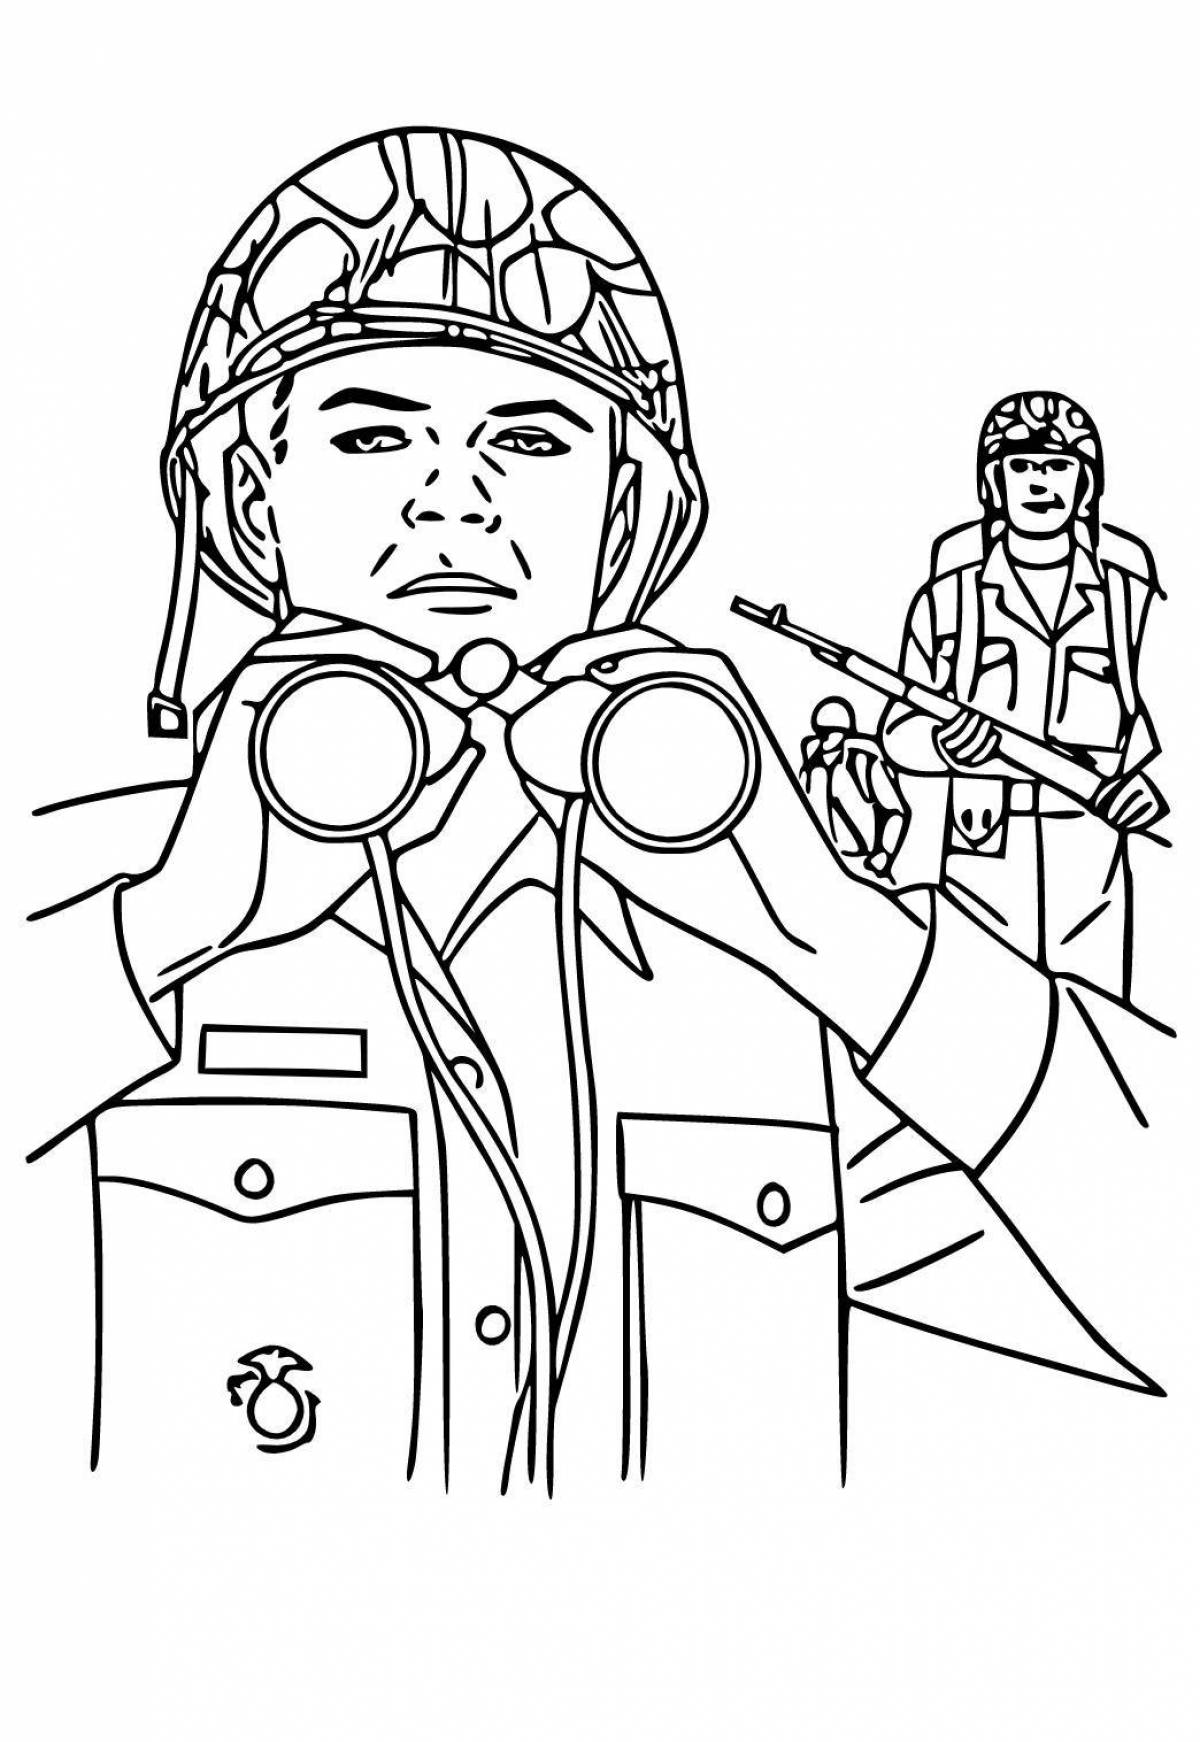 Jolly Russian soldier coloring for kids